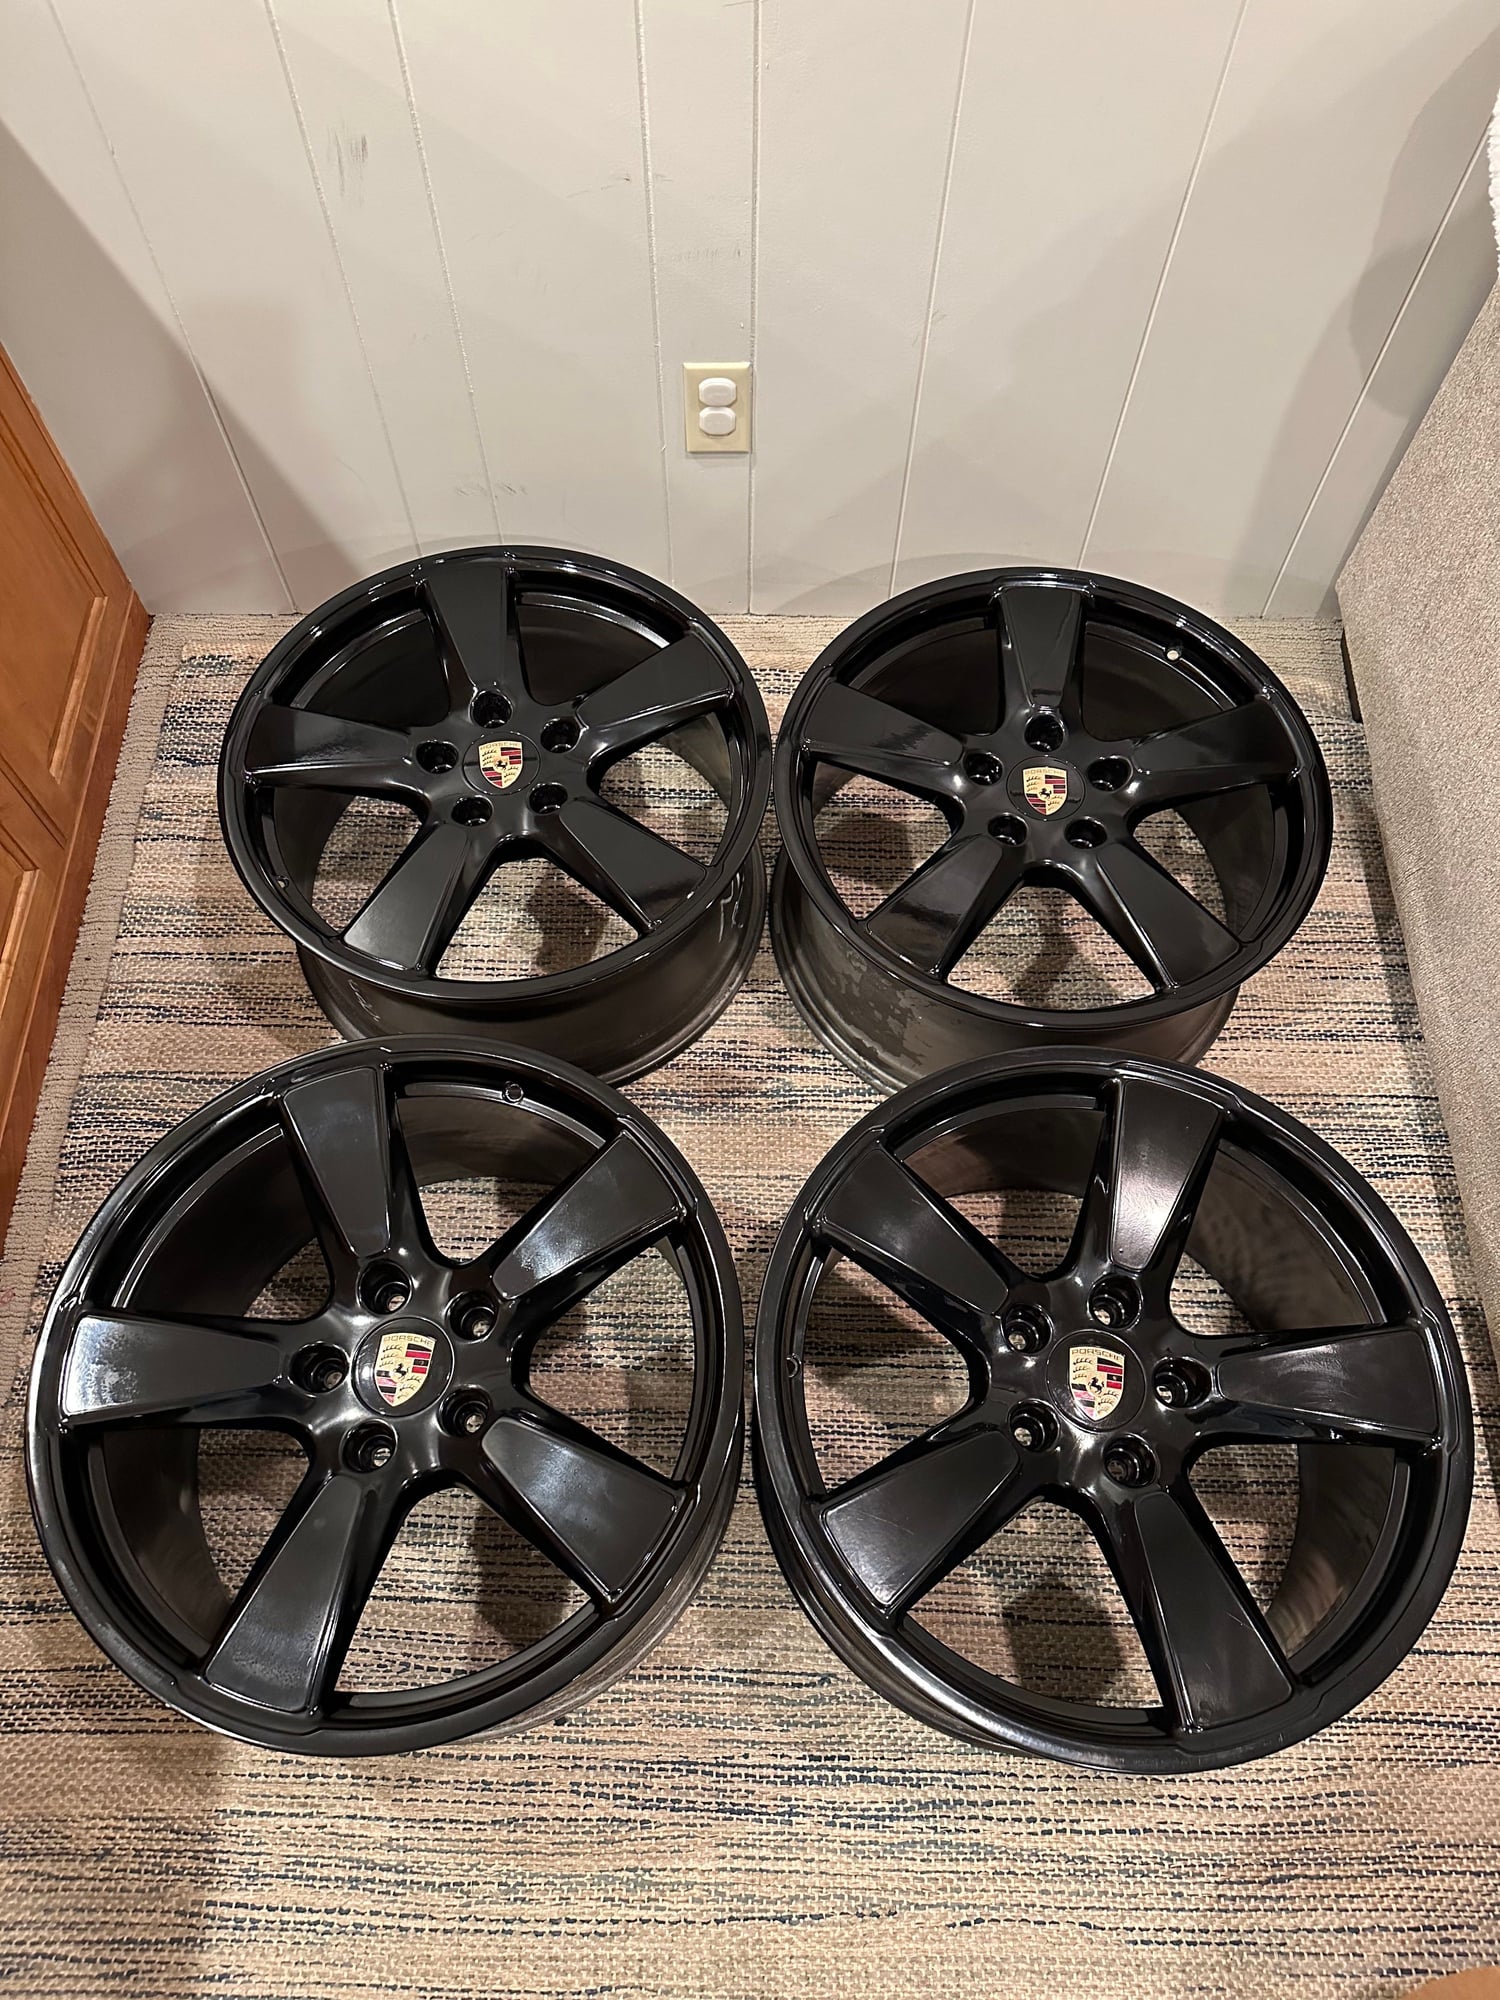 2020 Porsche Cayenne - 20" OEM Panamera Sport Classic Wheels - Black - Excellent - Wheels and Tires/Axles - $2,250 - Plymouth, MN 55447, United States